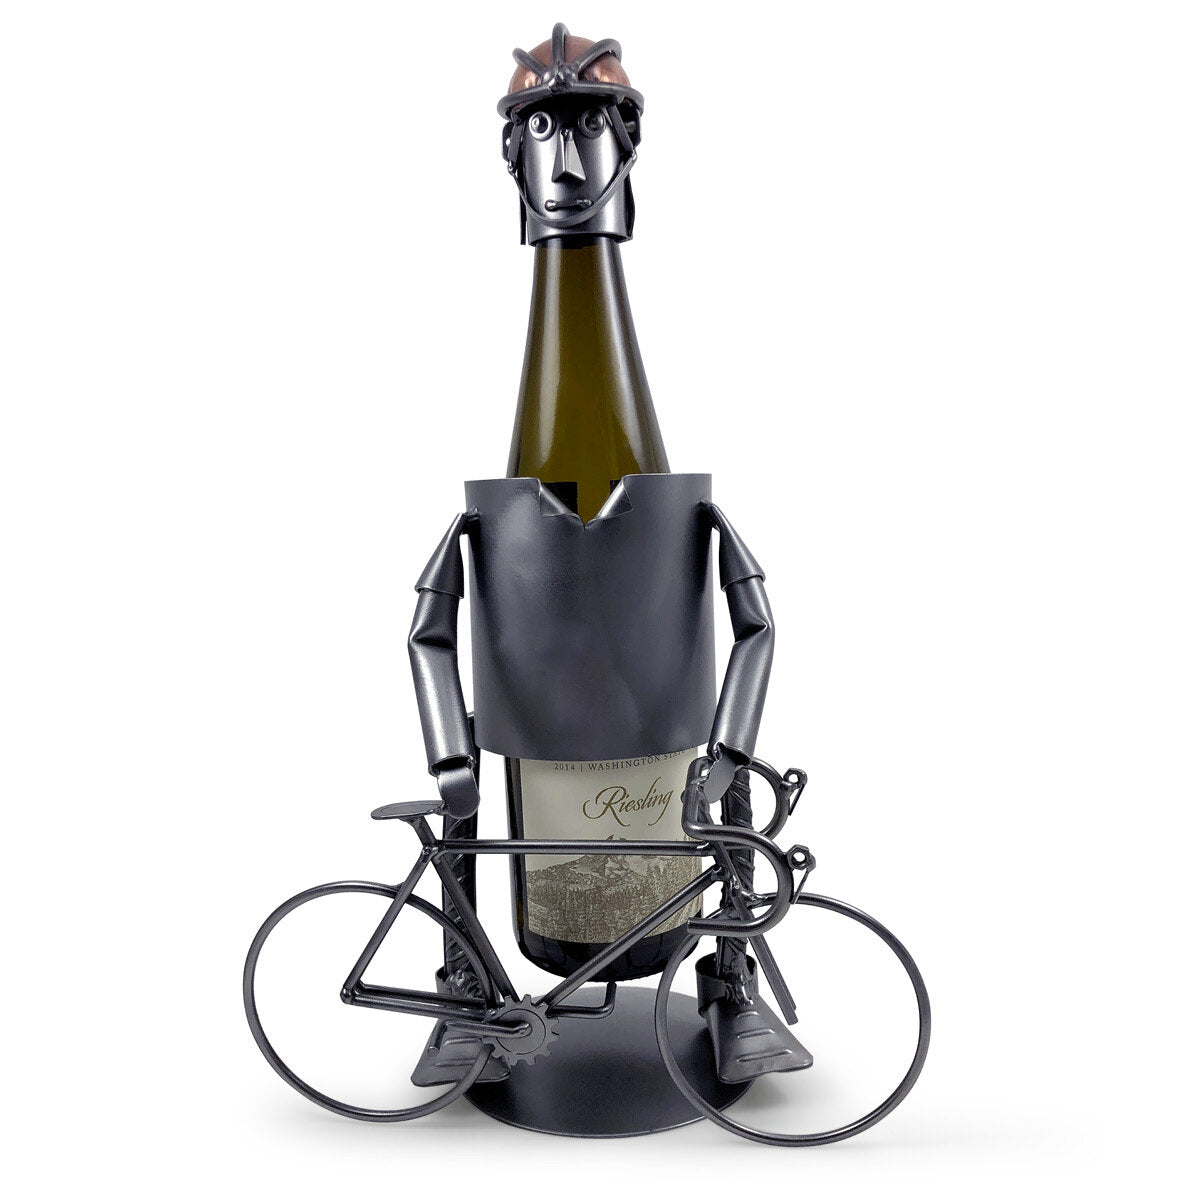 His Bicycle Rider Wine Caddy